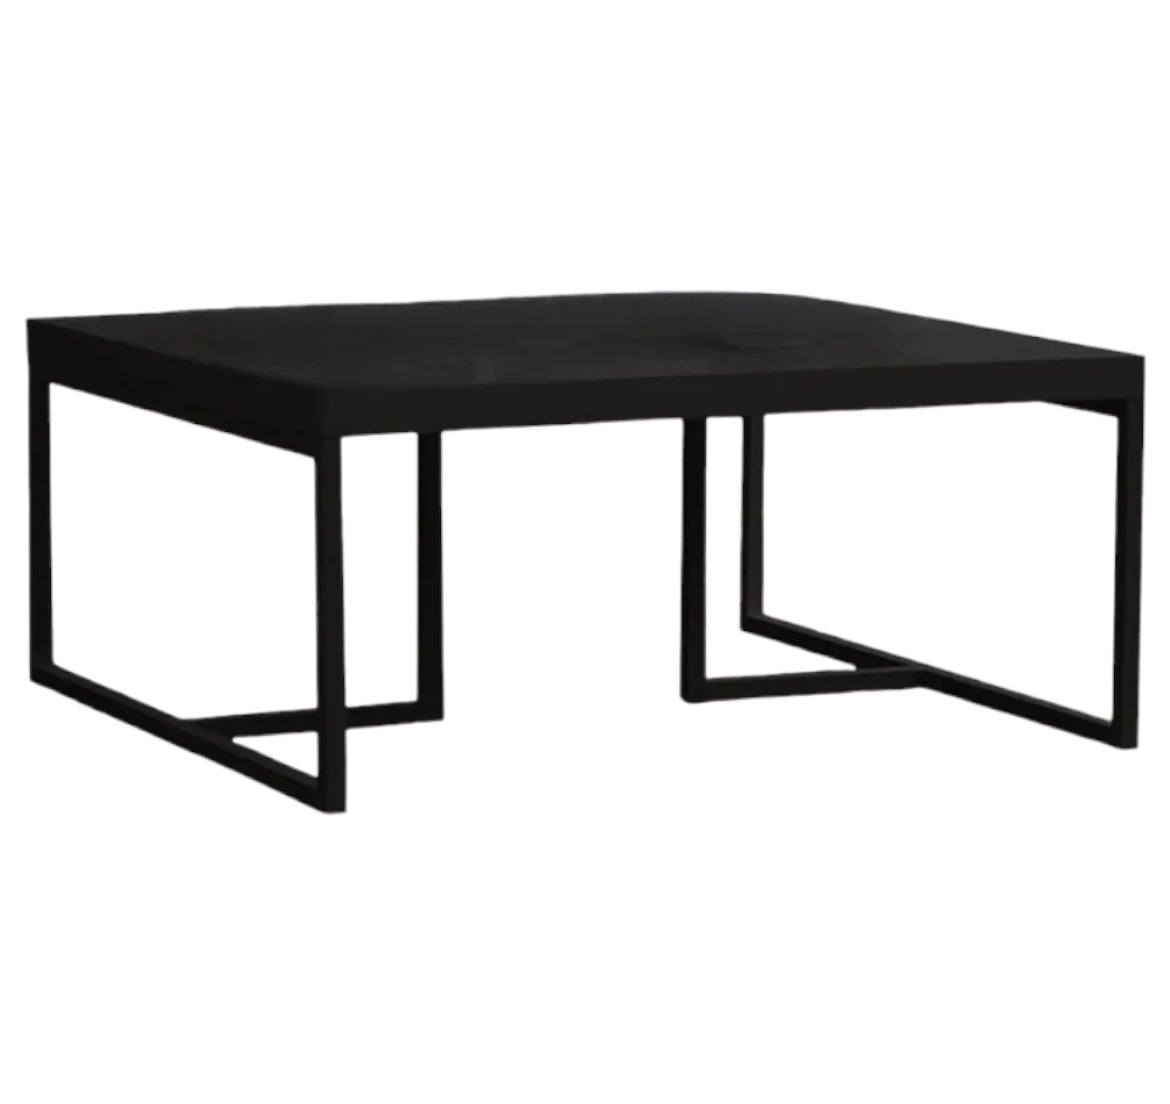 HAND MADE AXEL BLACK SCANDINAVIAN INSPIRED WOODEN COFFEE TABLE